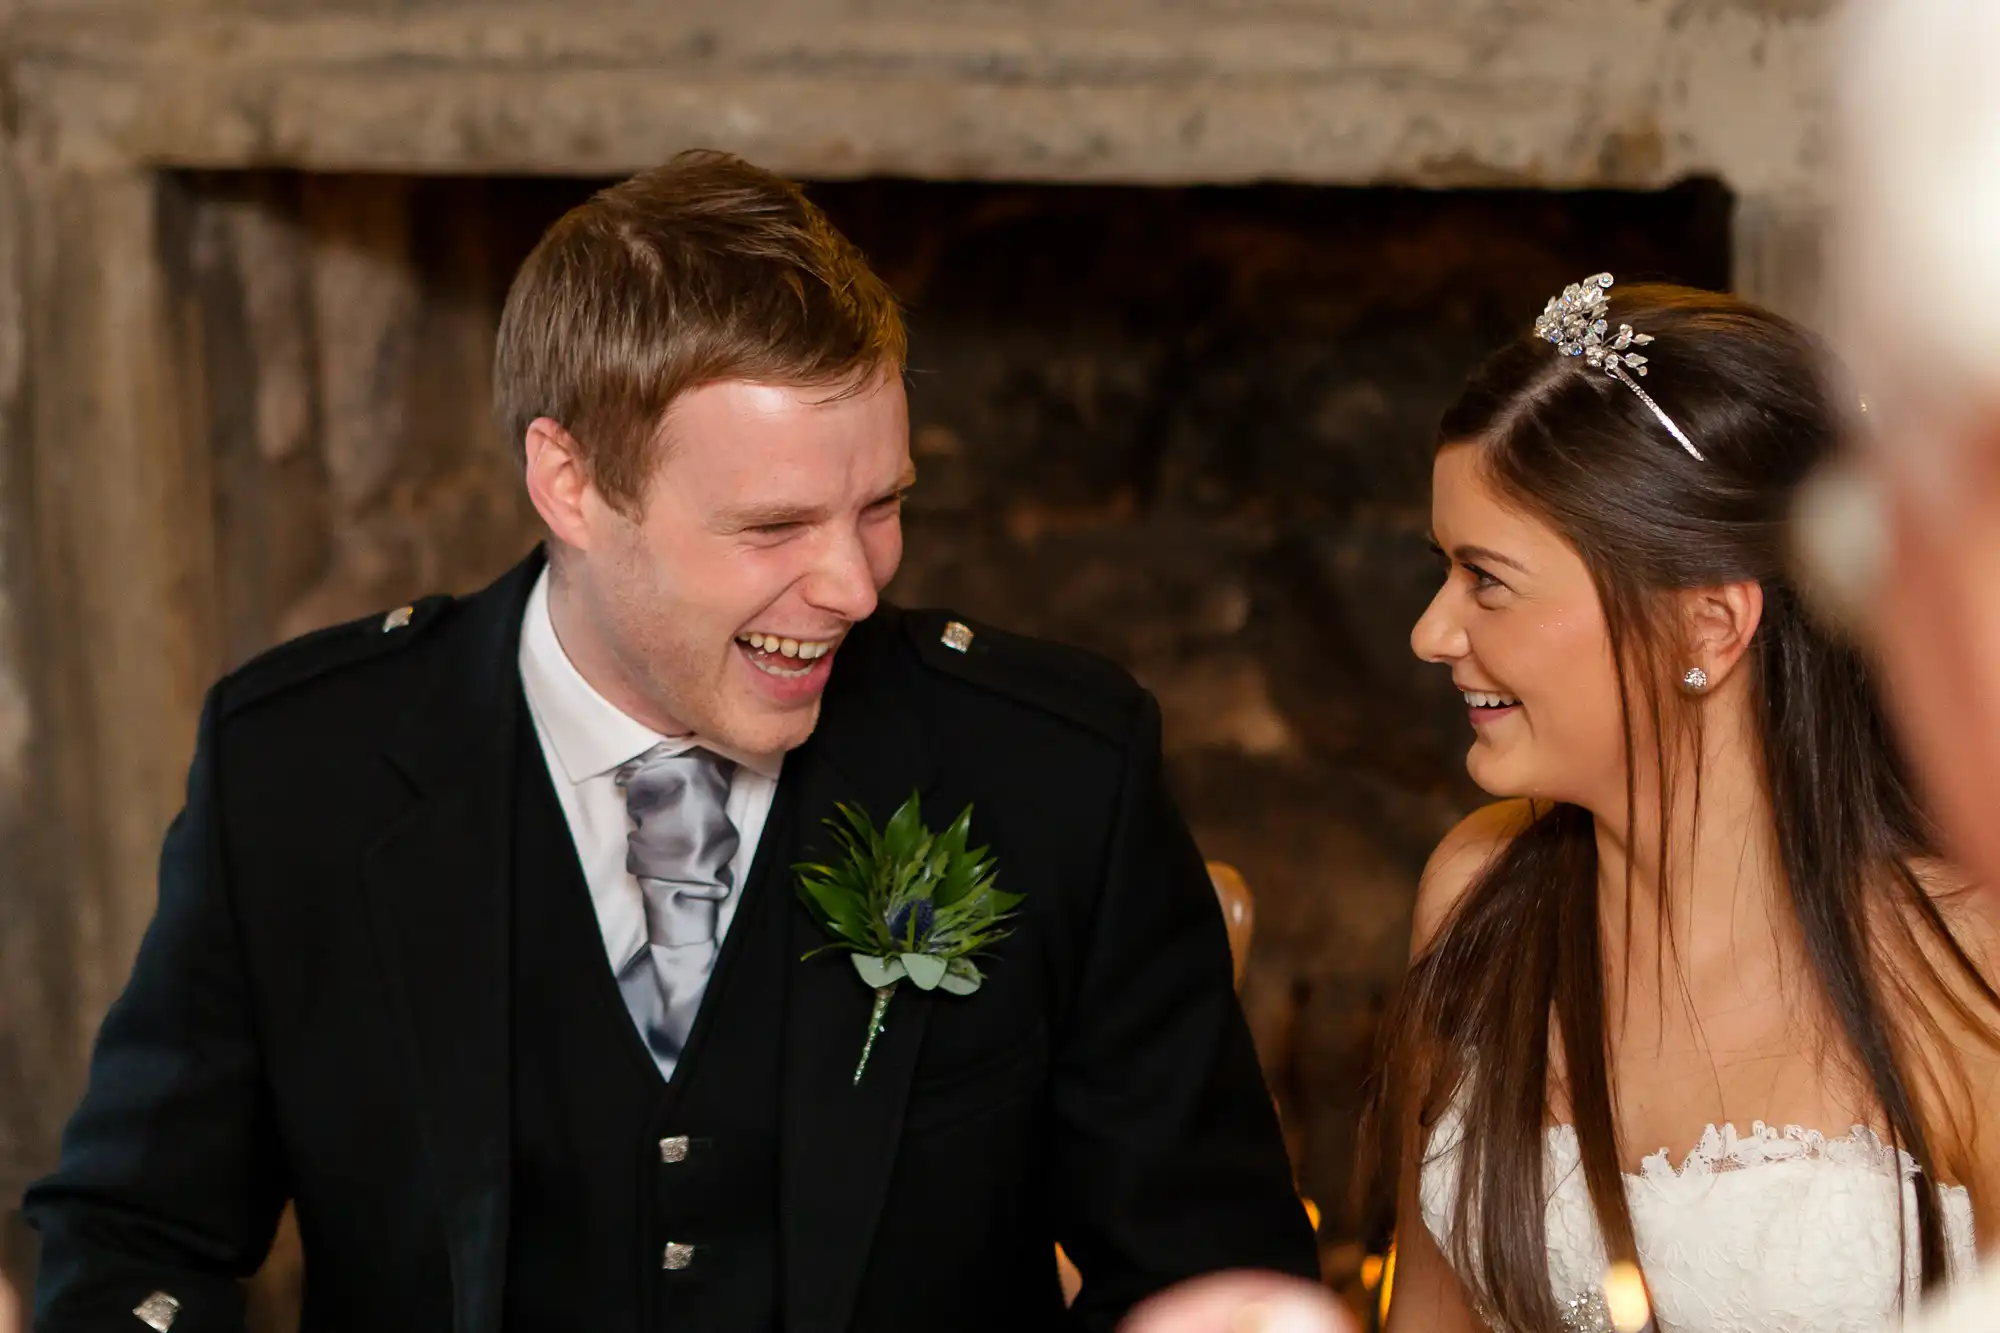 A smiling groom in a military uniform and a bride with a tiara sitting together, sharing a joyous moment.